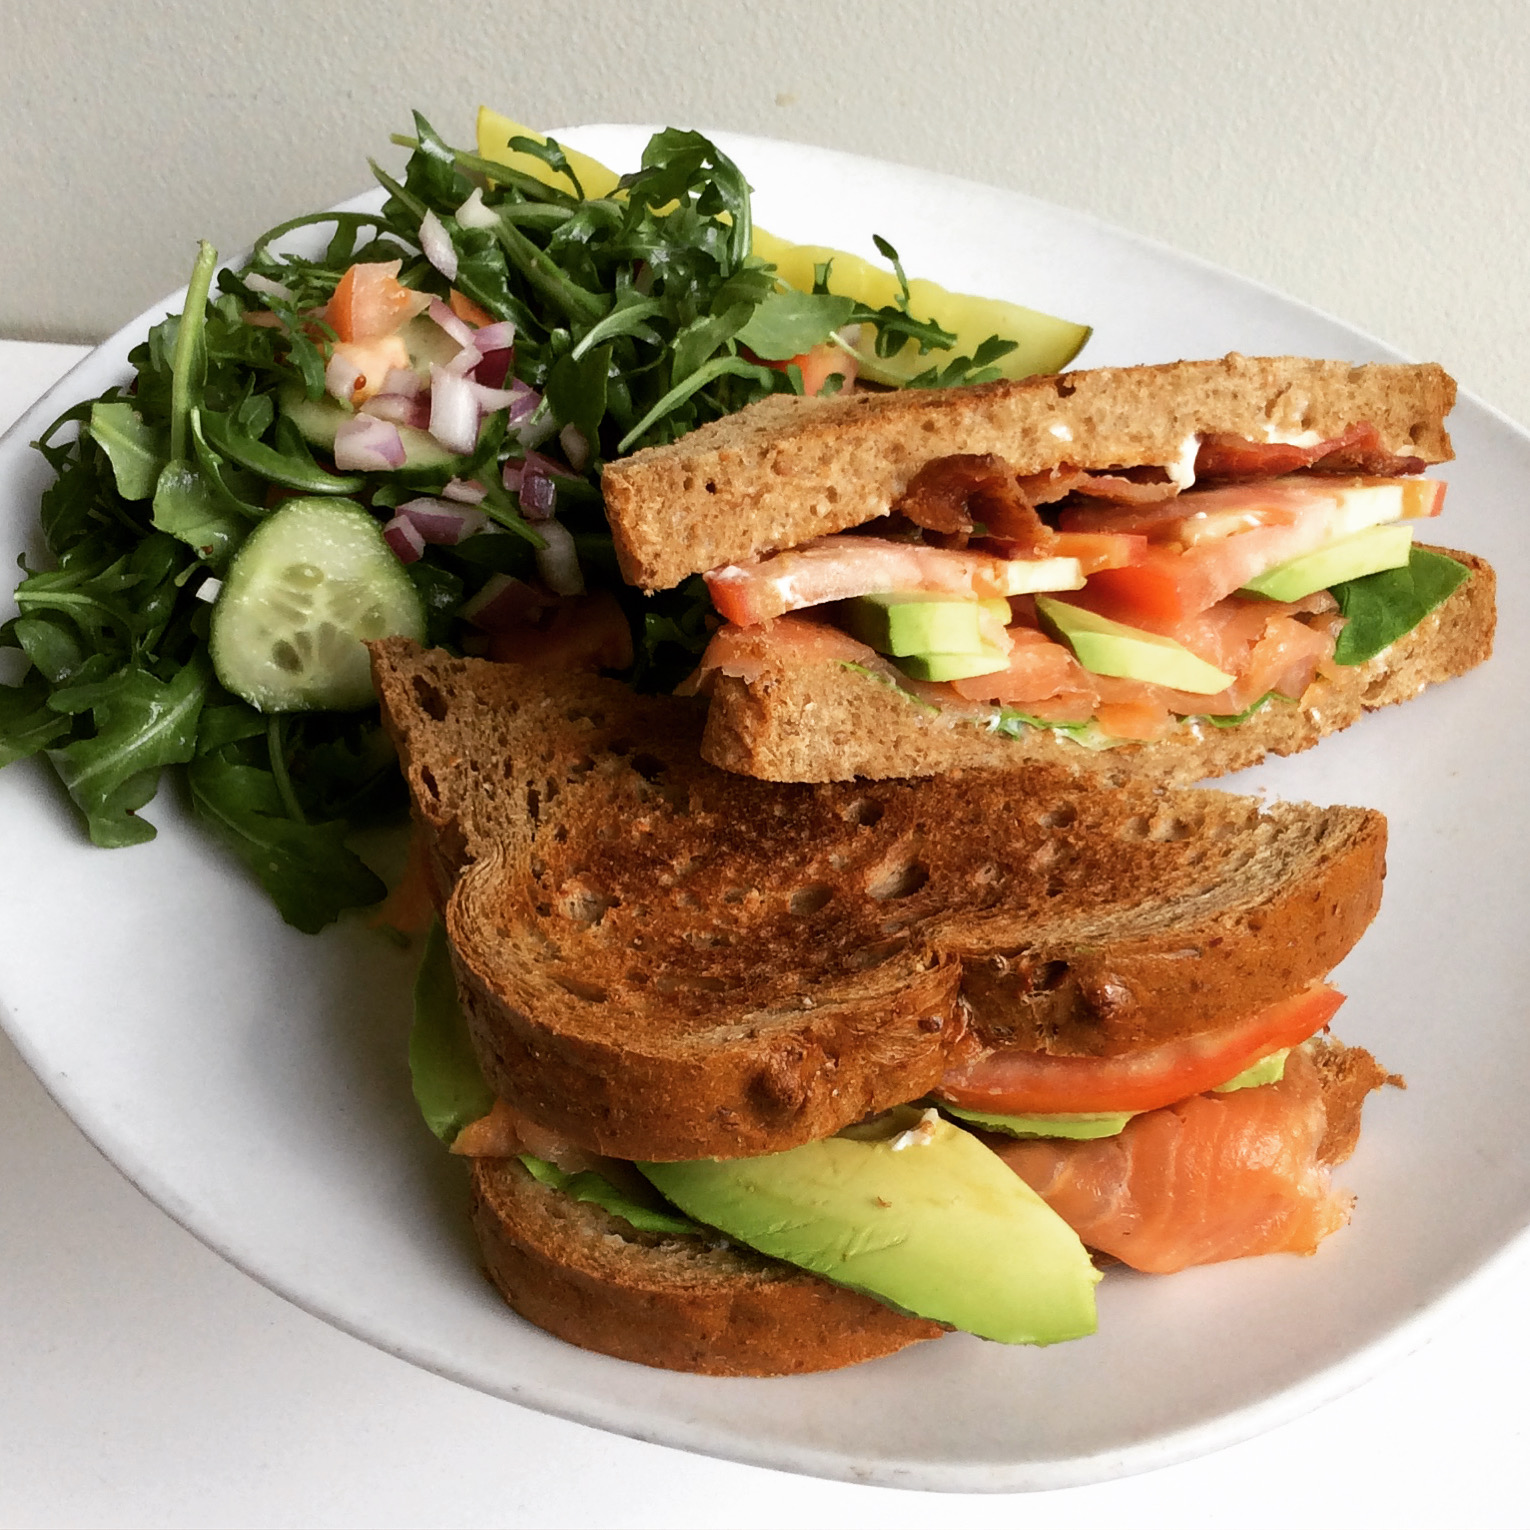 Sandwich with smoked salmon, avocado, bacon, and aioli, and a side salad, on a white plate